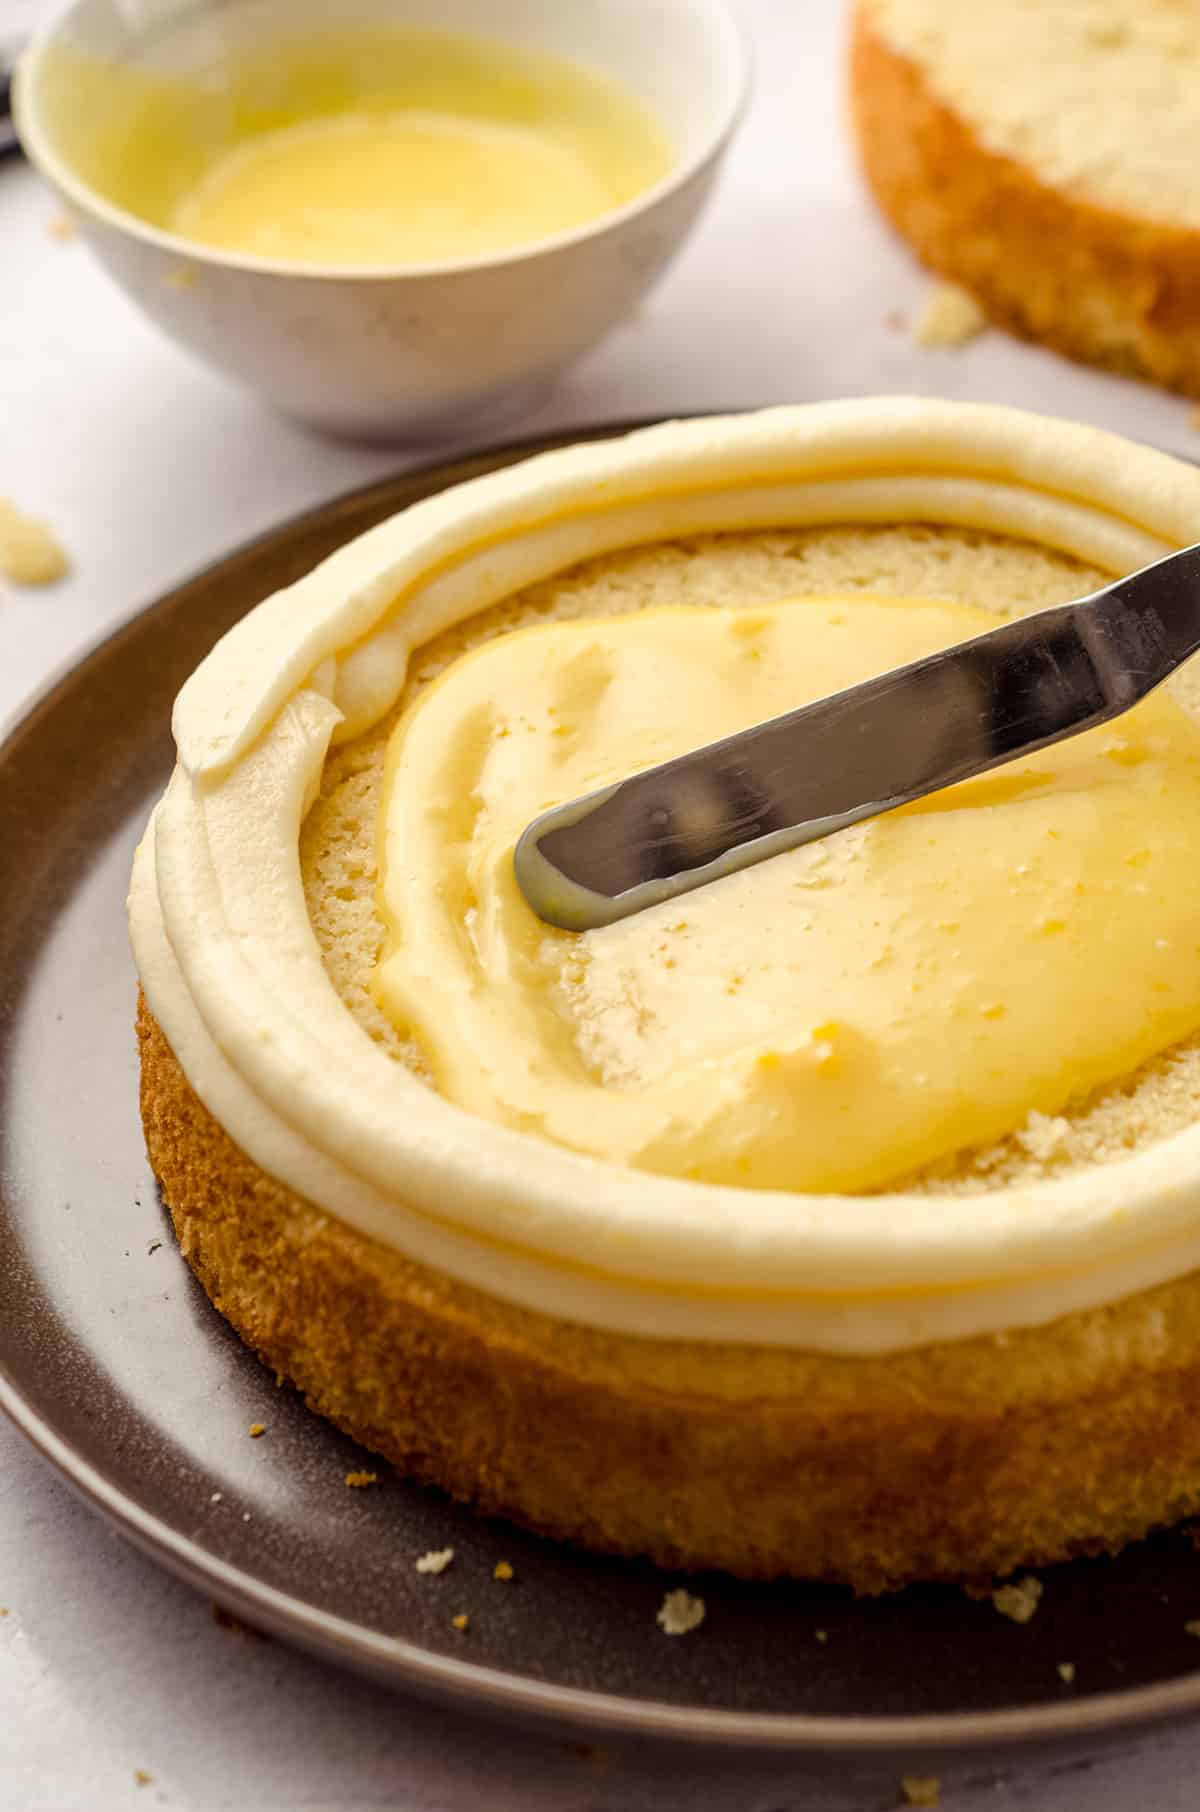 Smoothing lemon curd into the center of a lemon cake.